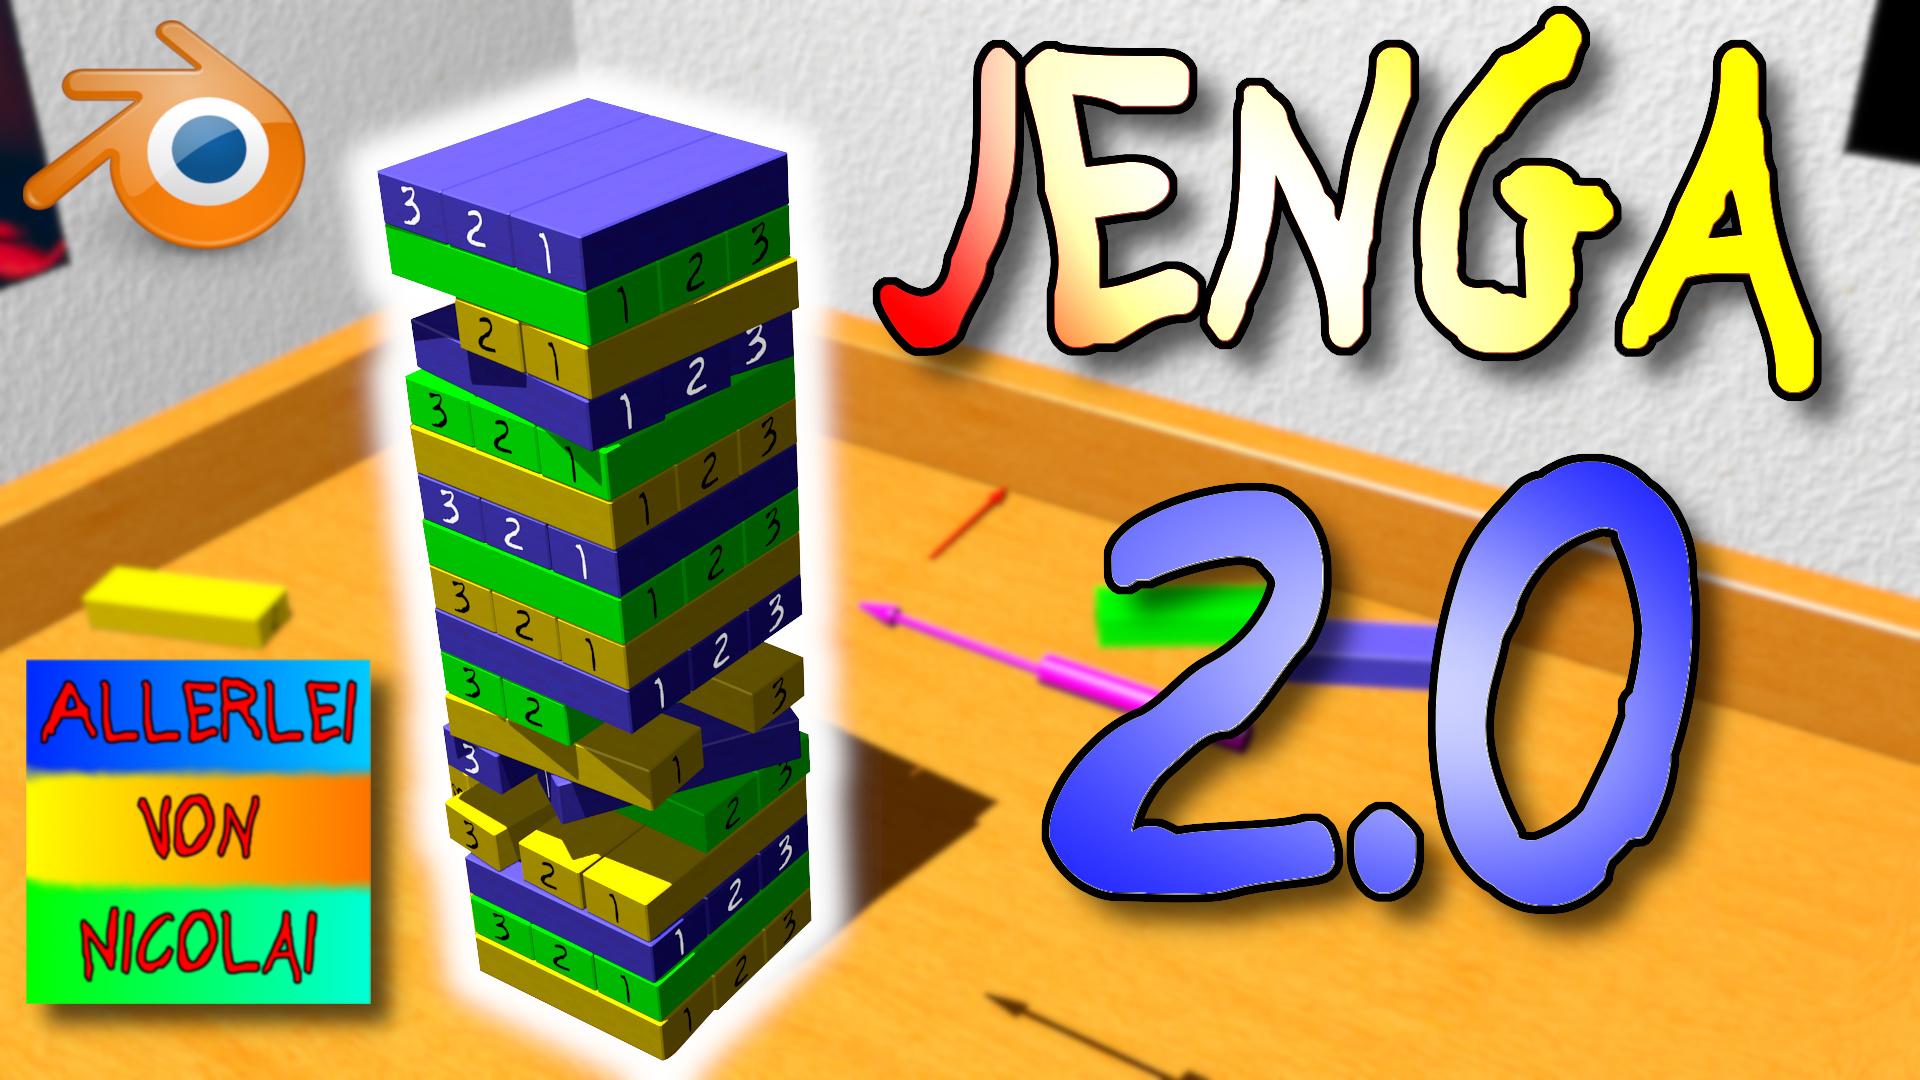 New Youtooz X Jenga game first look | Youtooz is making board games now? -  YouTube